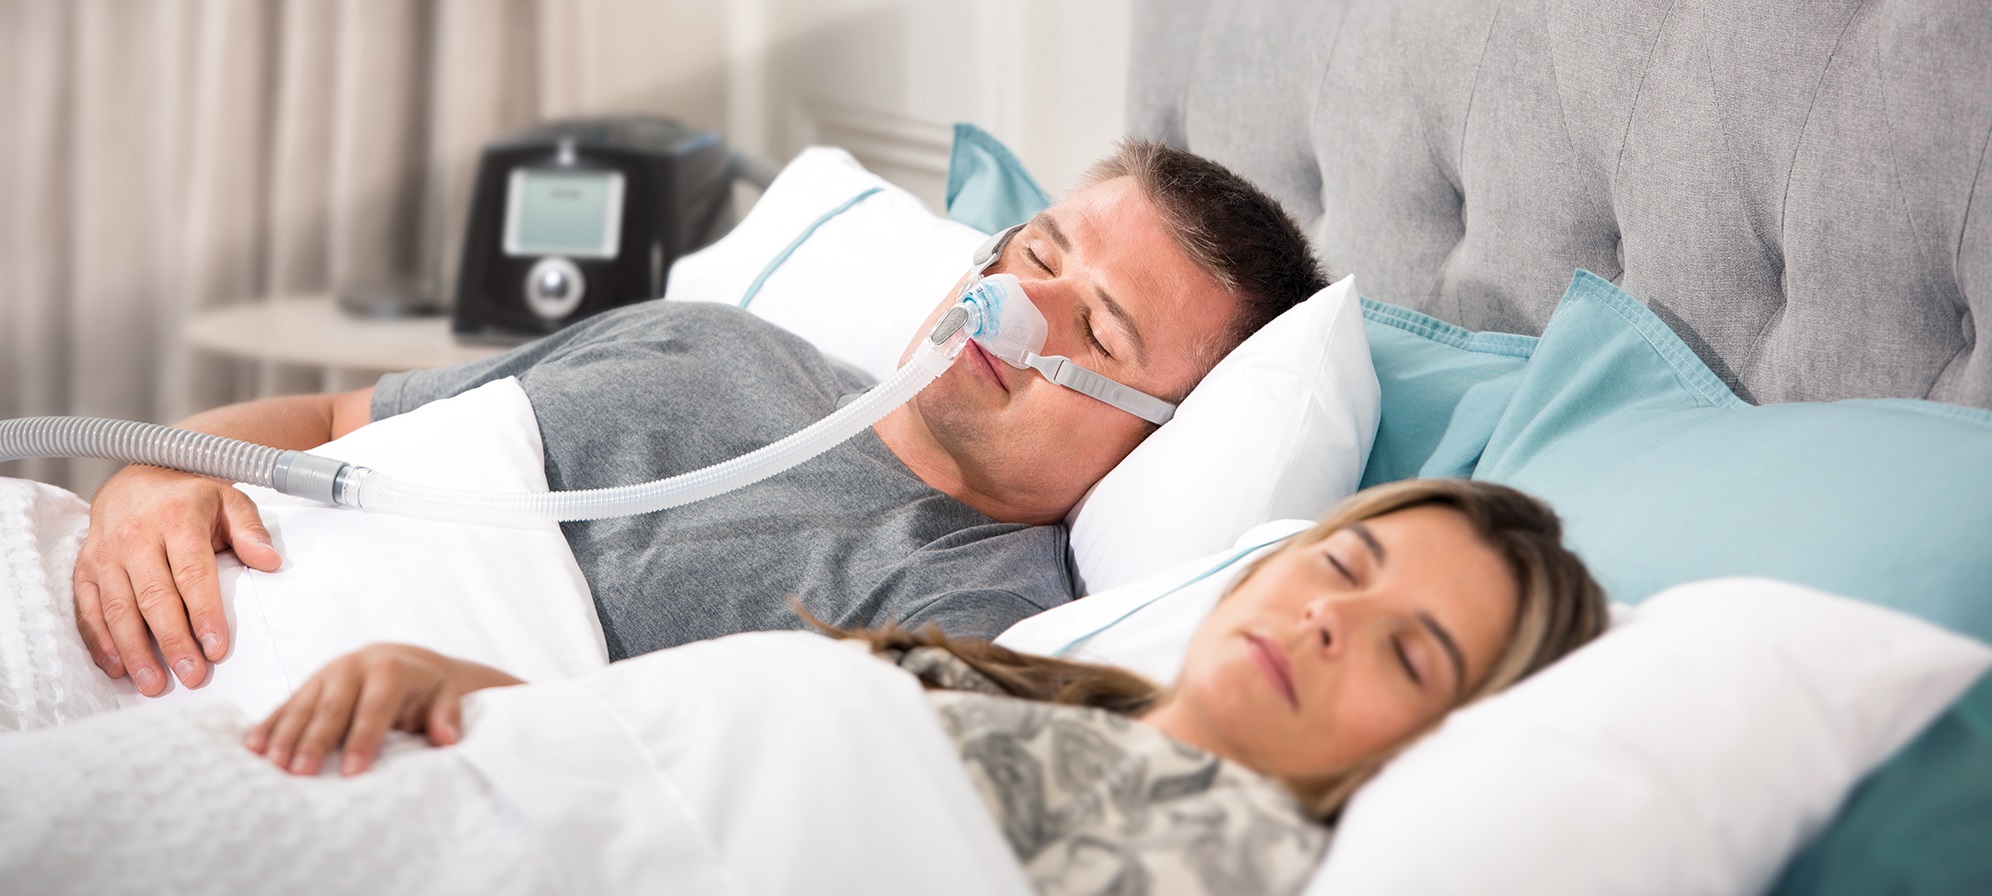 Complement your sleep apnea treatments with these tips